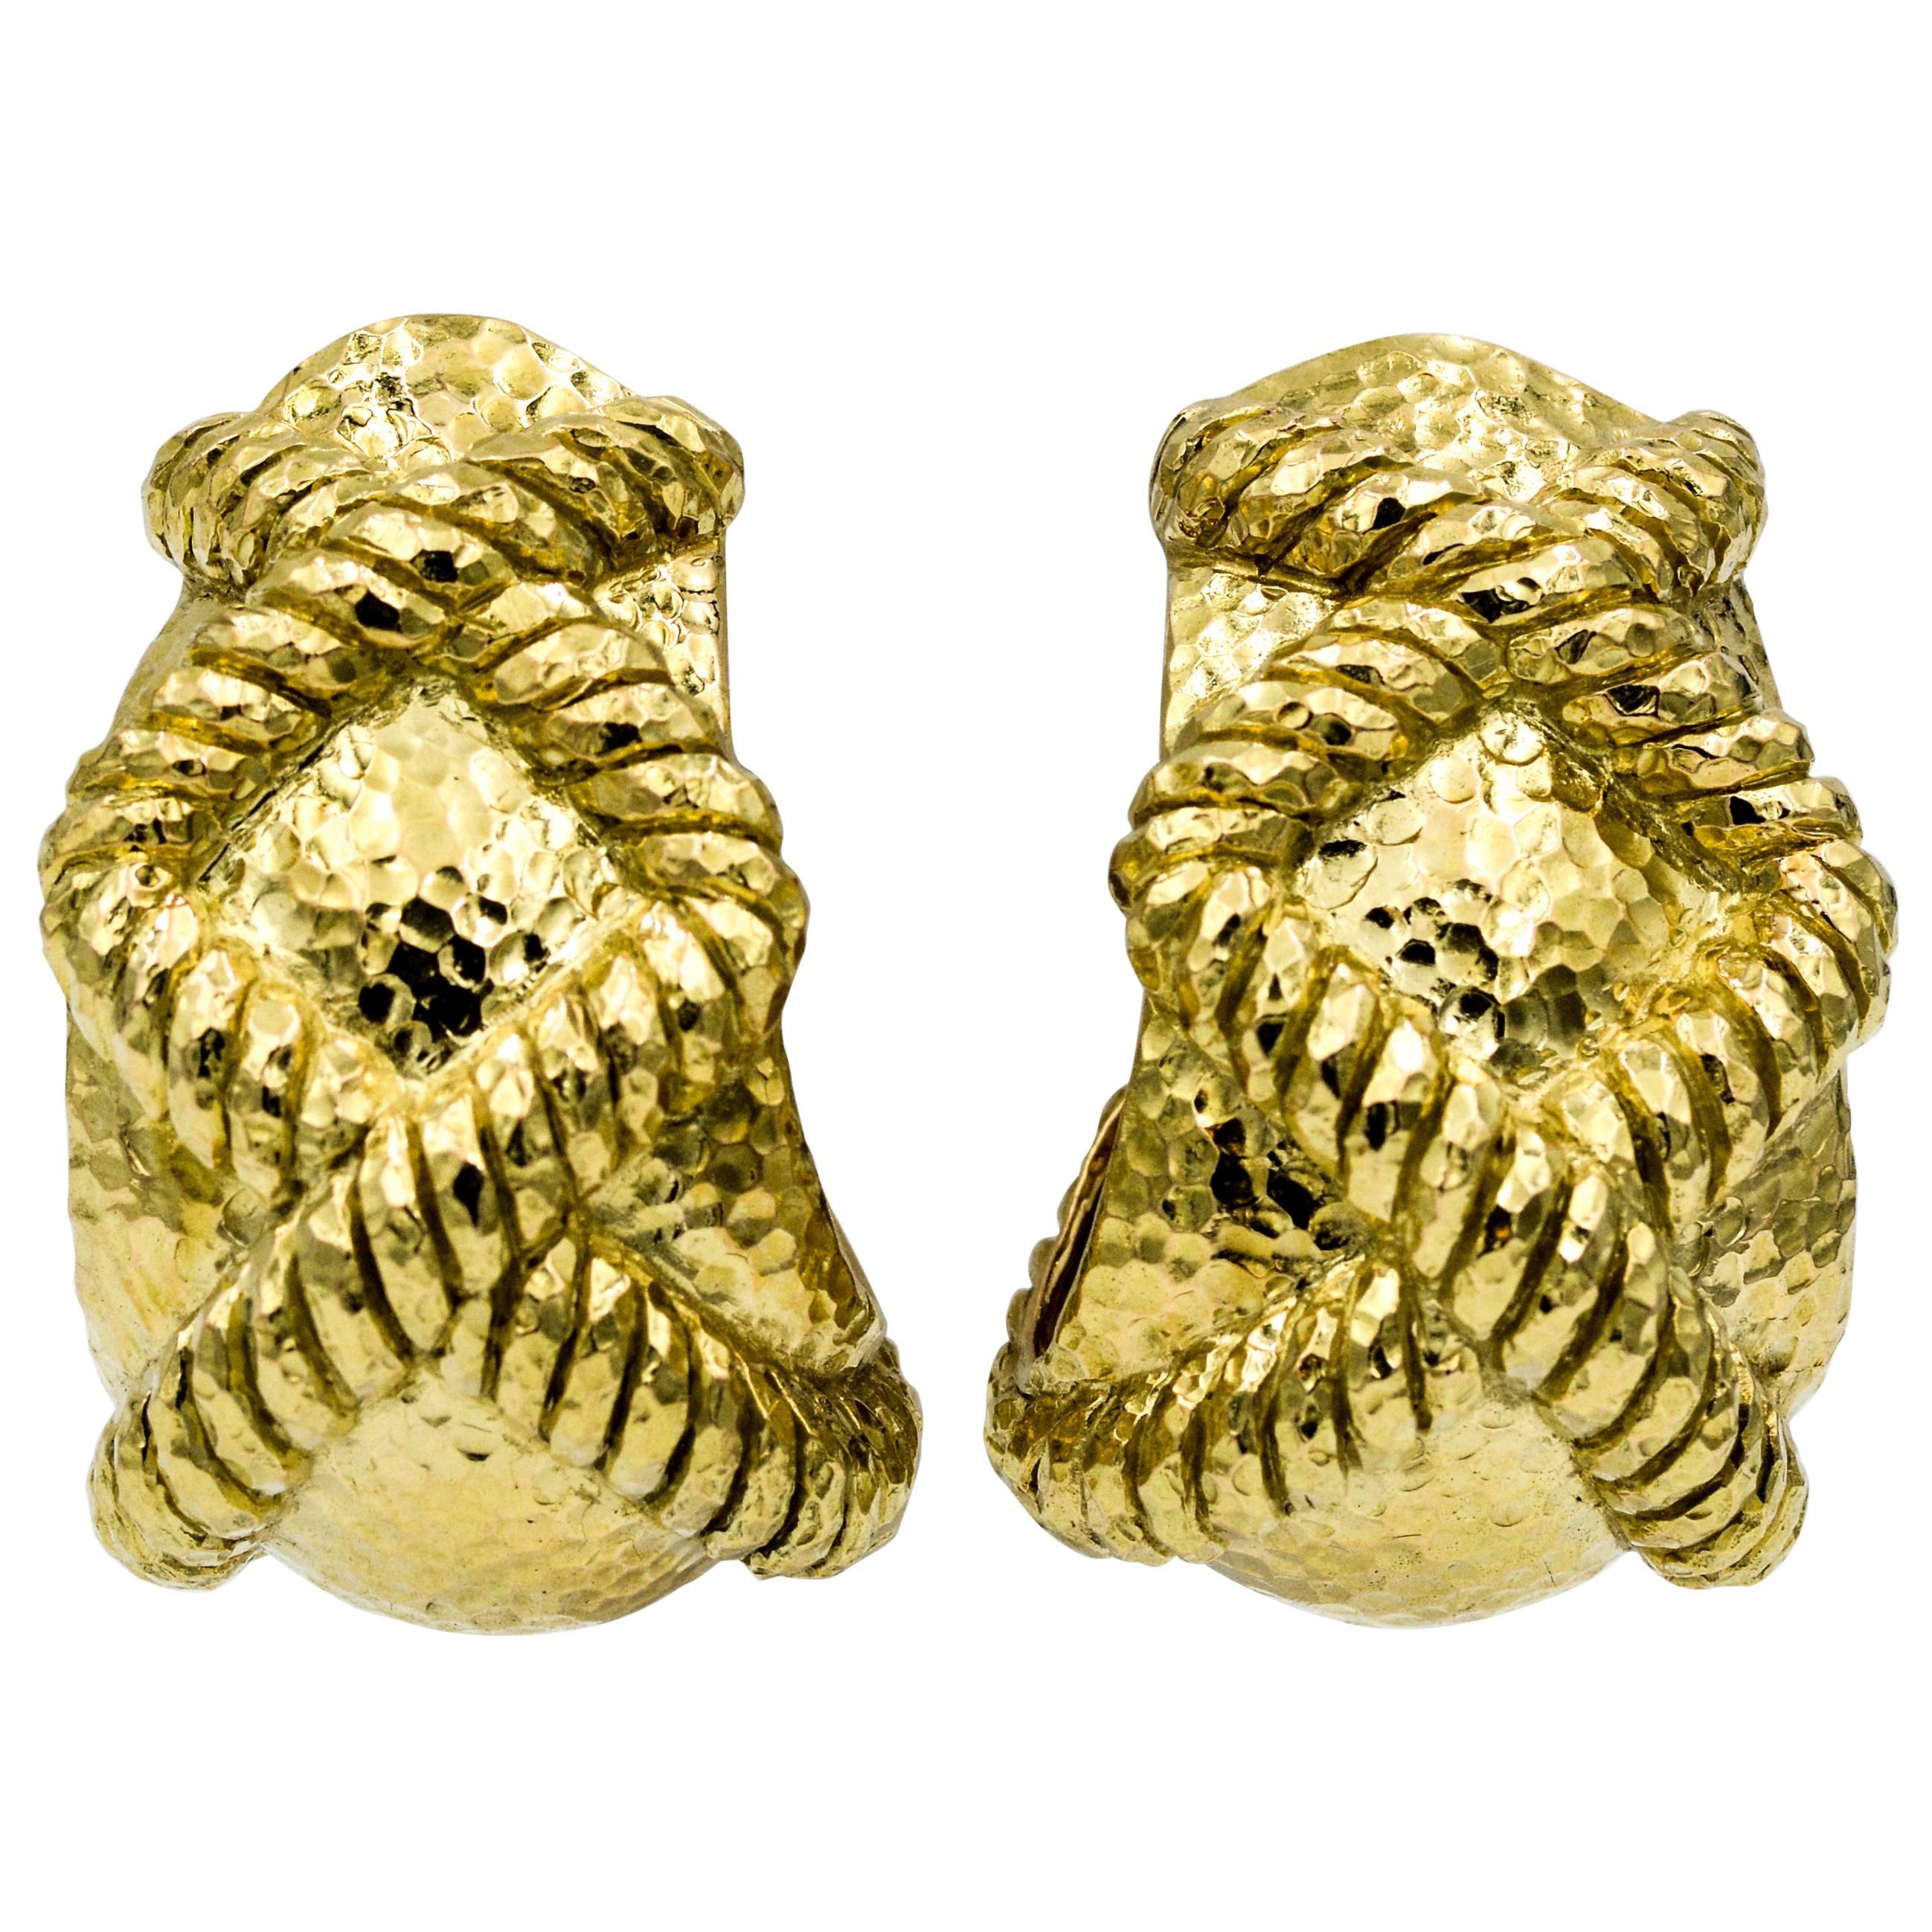 Driven by art, design and bold pieces these earrings embody David Webb’s textured gold statements. These clipped back 18 karat yellow gold earrings have two banded X's set in a hammered finish. The earrings measure 35.25 mm tall, 22.55 mm wide, and